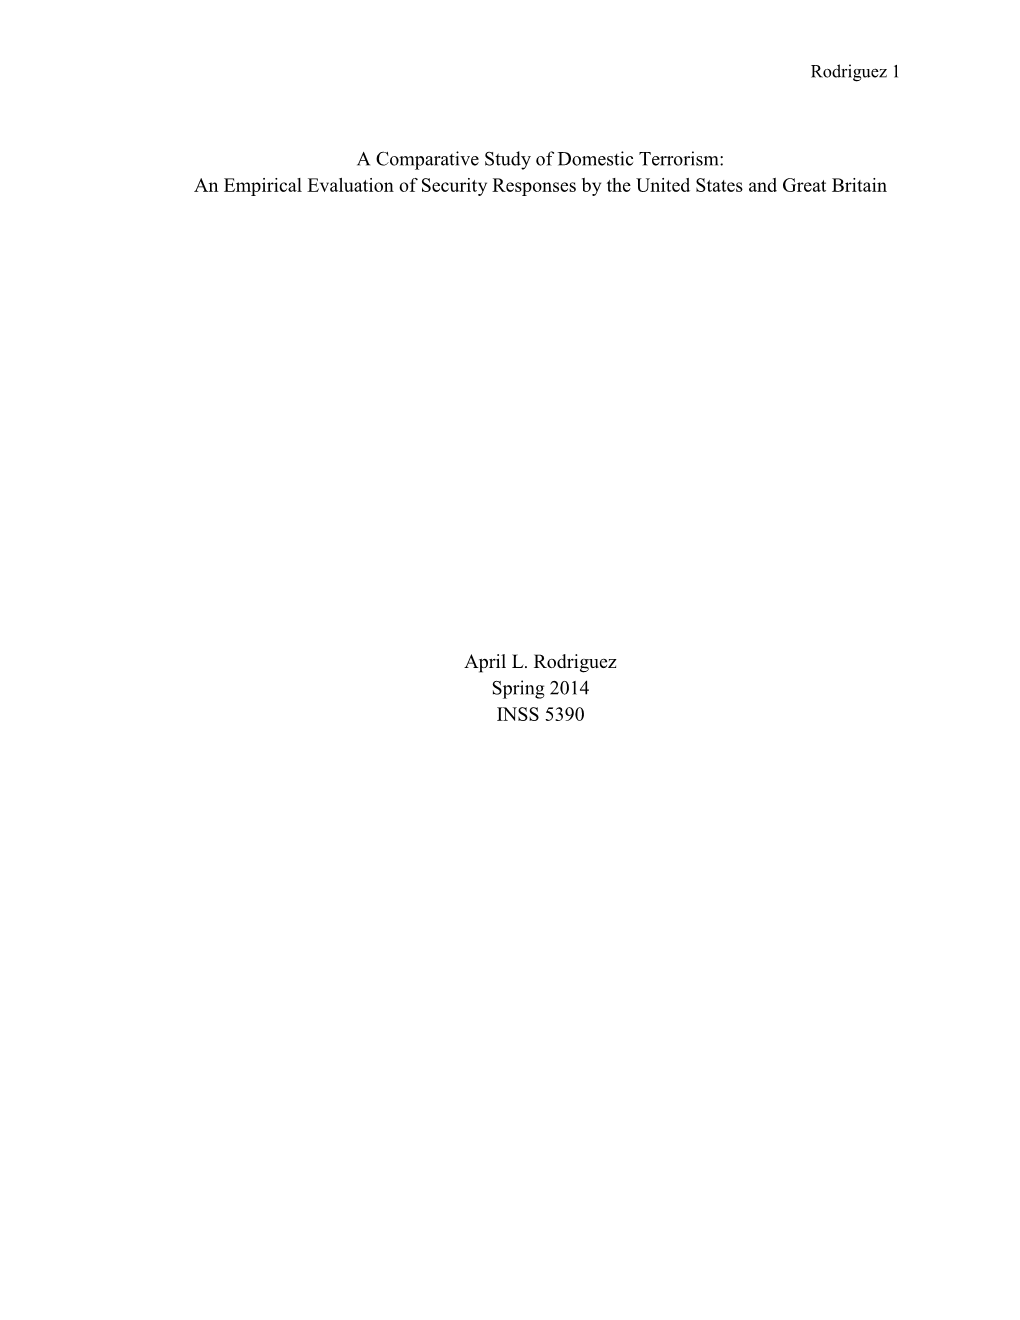 A Comparative Study of Domestic Terrorism: an Empirical Evaluation of Security Responses by the United States and Great Britain